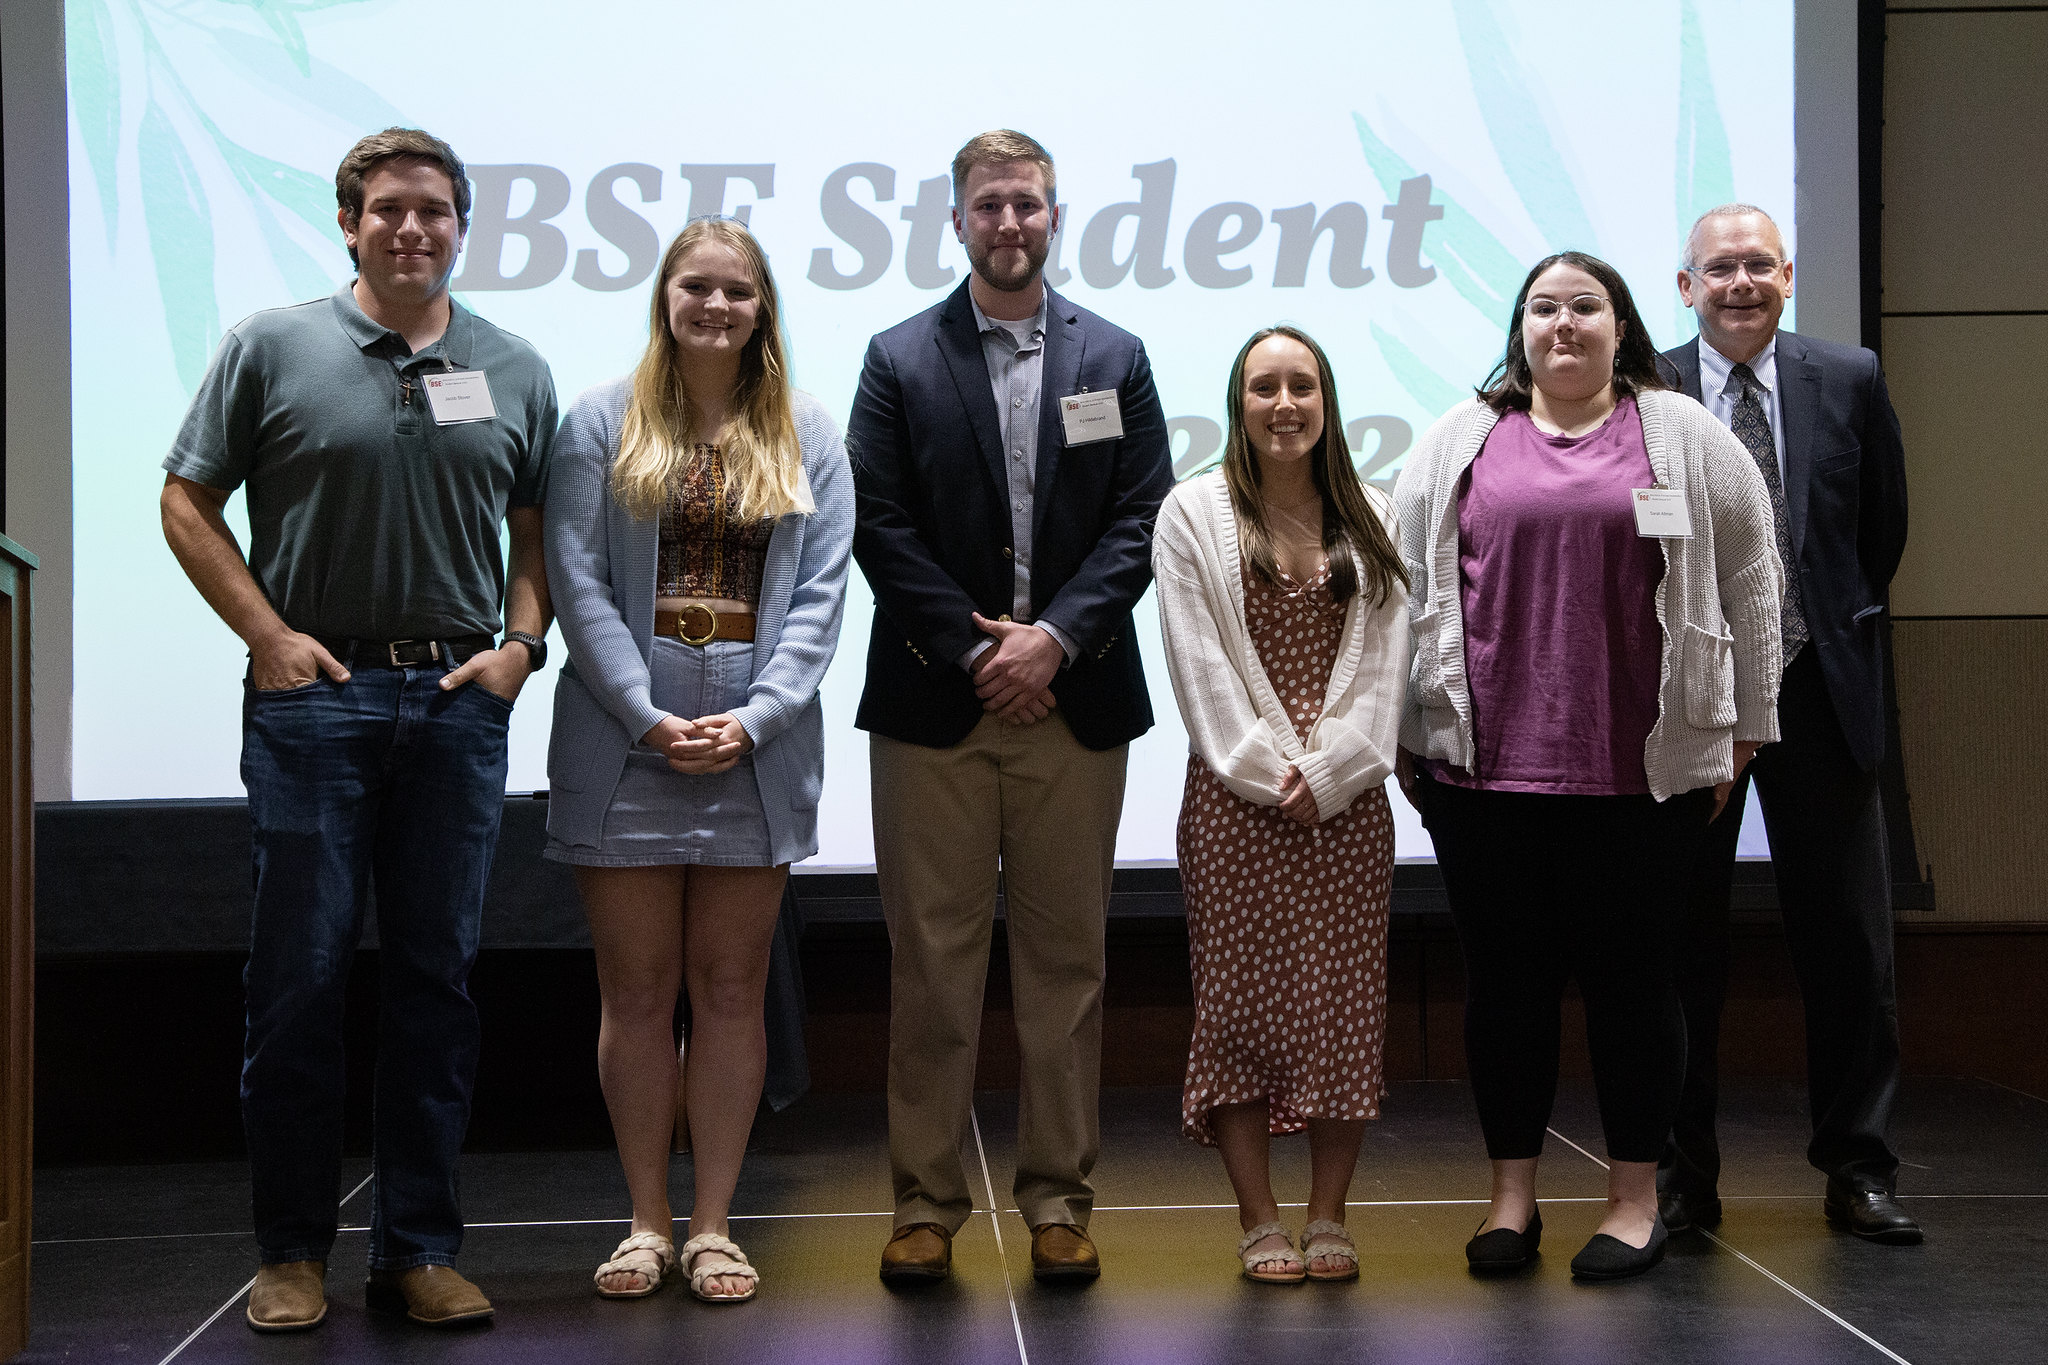 Students who graduated with highest distinction were among those recognized at the BSE student banquet on May 11, 2023.